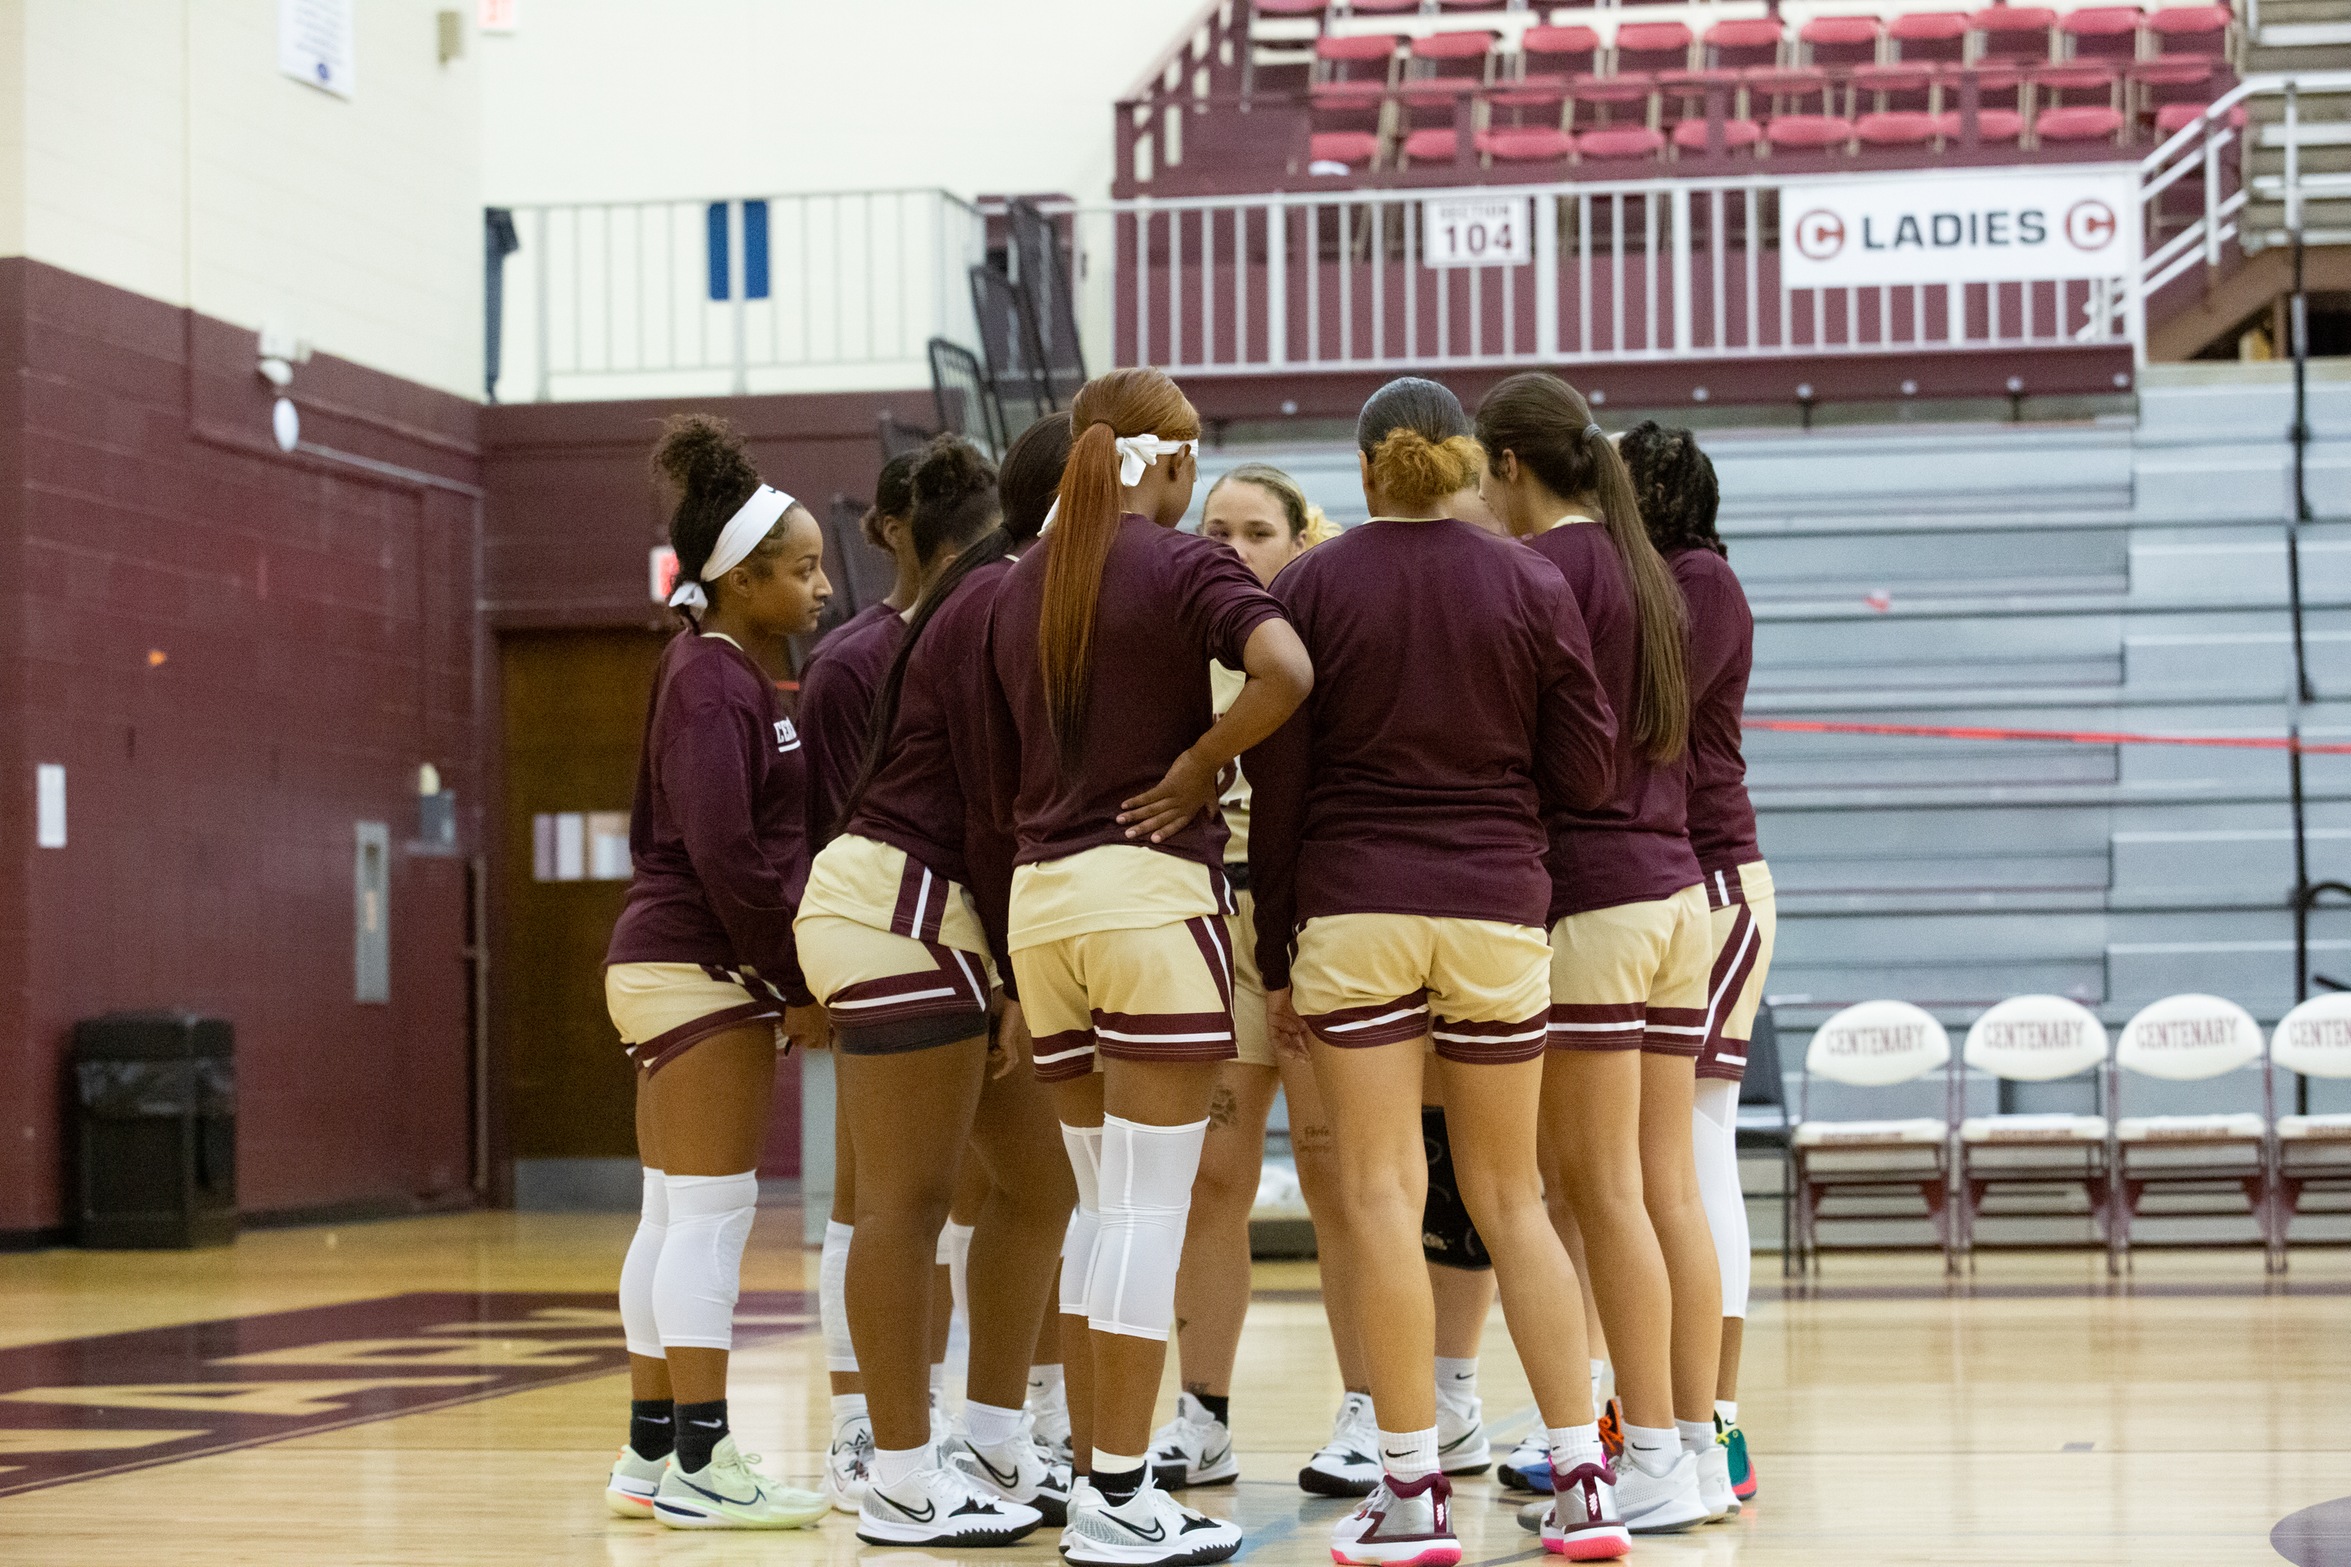 Ladies Fall In Monday Exhibition At ULM